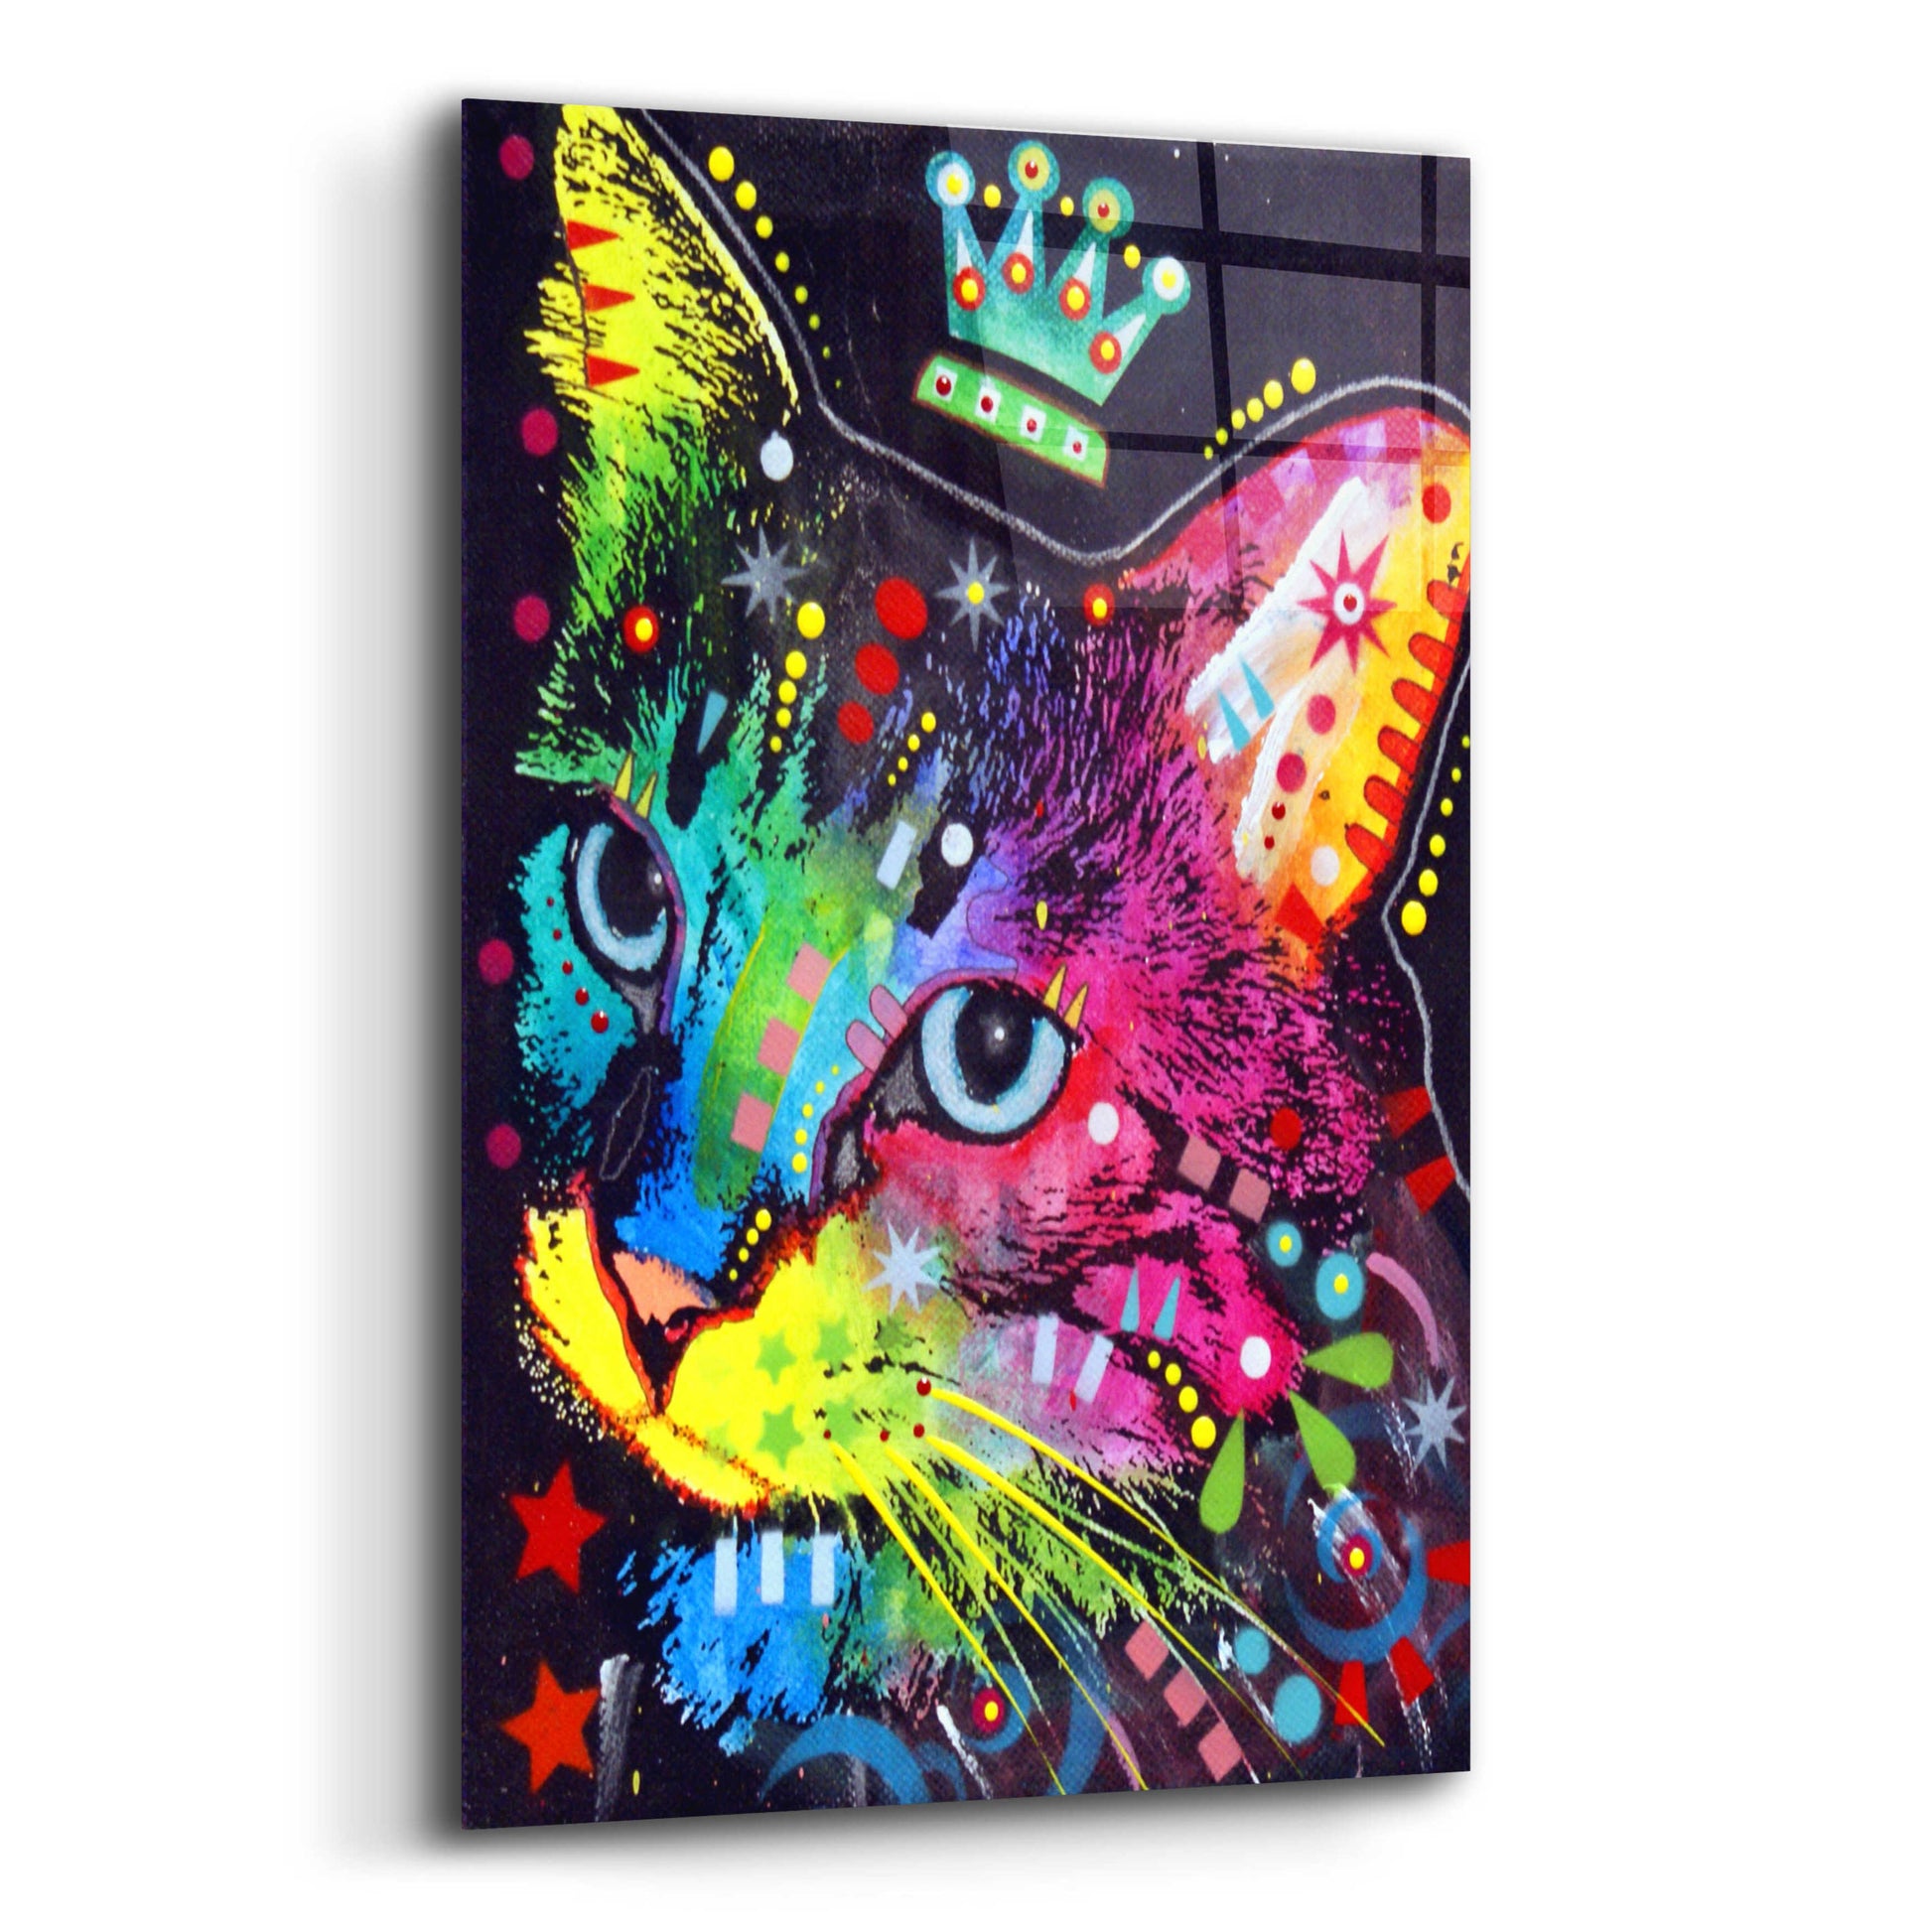 Epic Art 'Thinking Cat Crowned' by Dean Russo, Acrylic Glass Wall Art,12x16